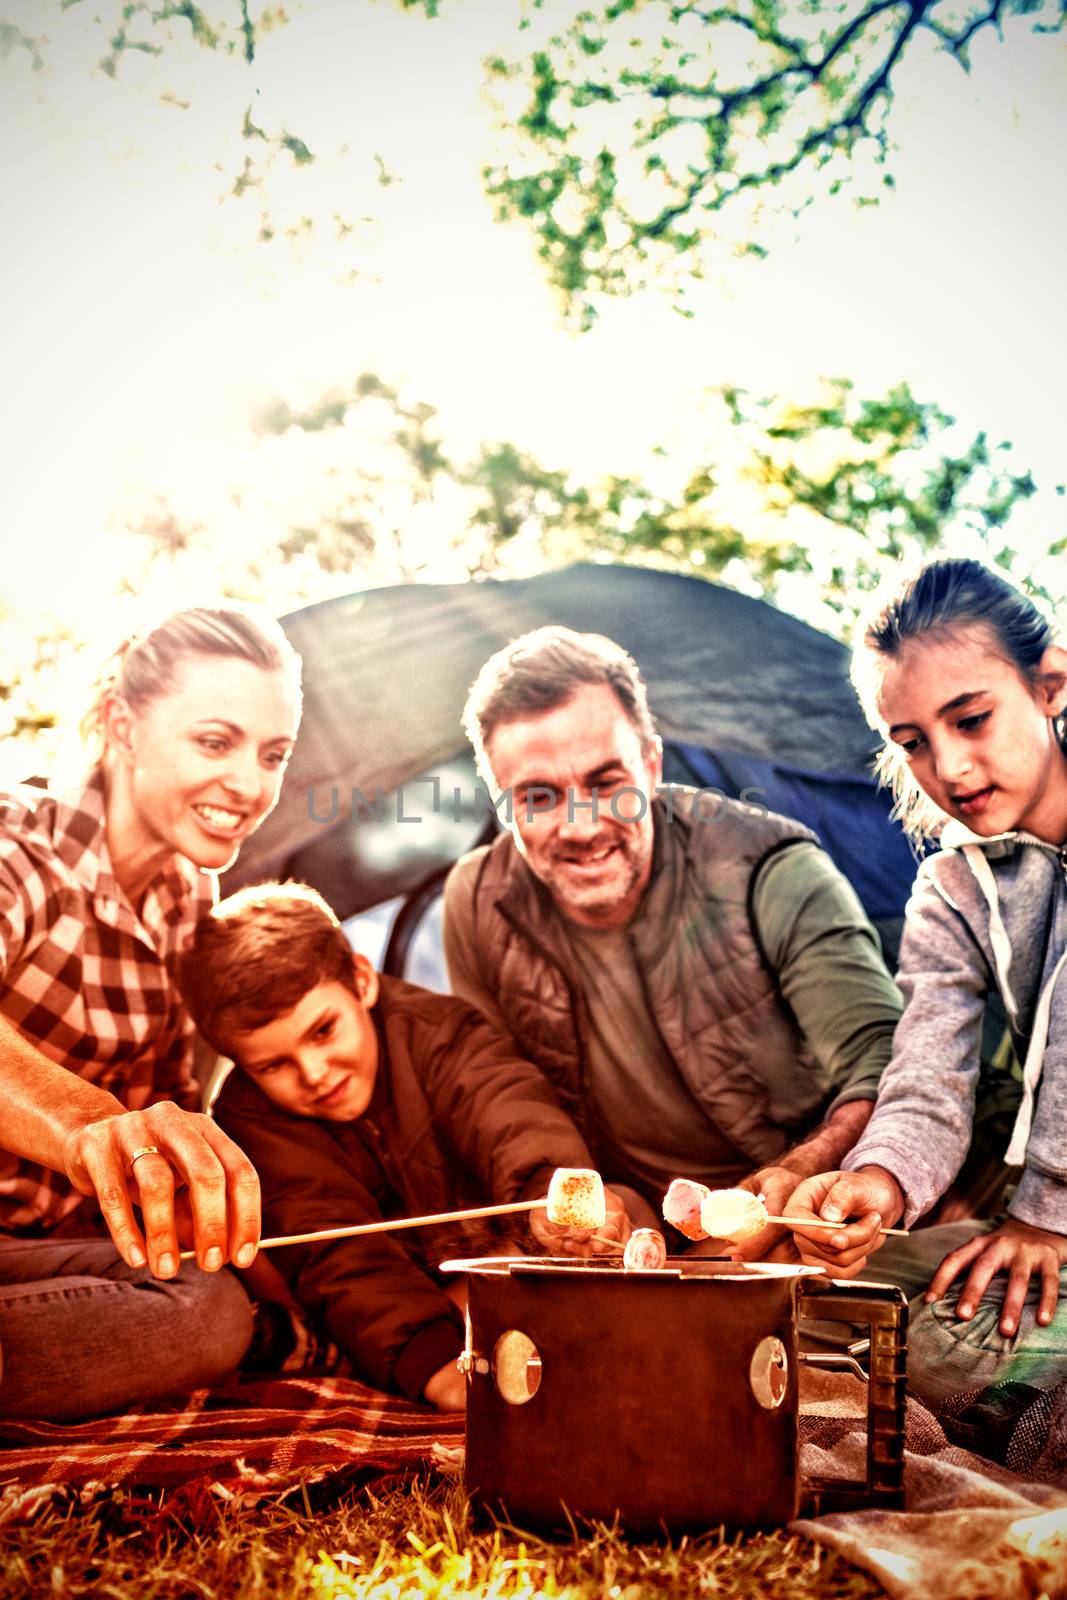 Family roasting marshmallows outside the tent on a sunny day